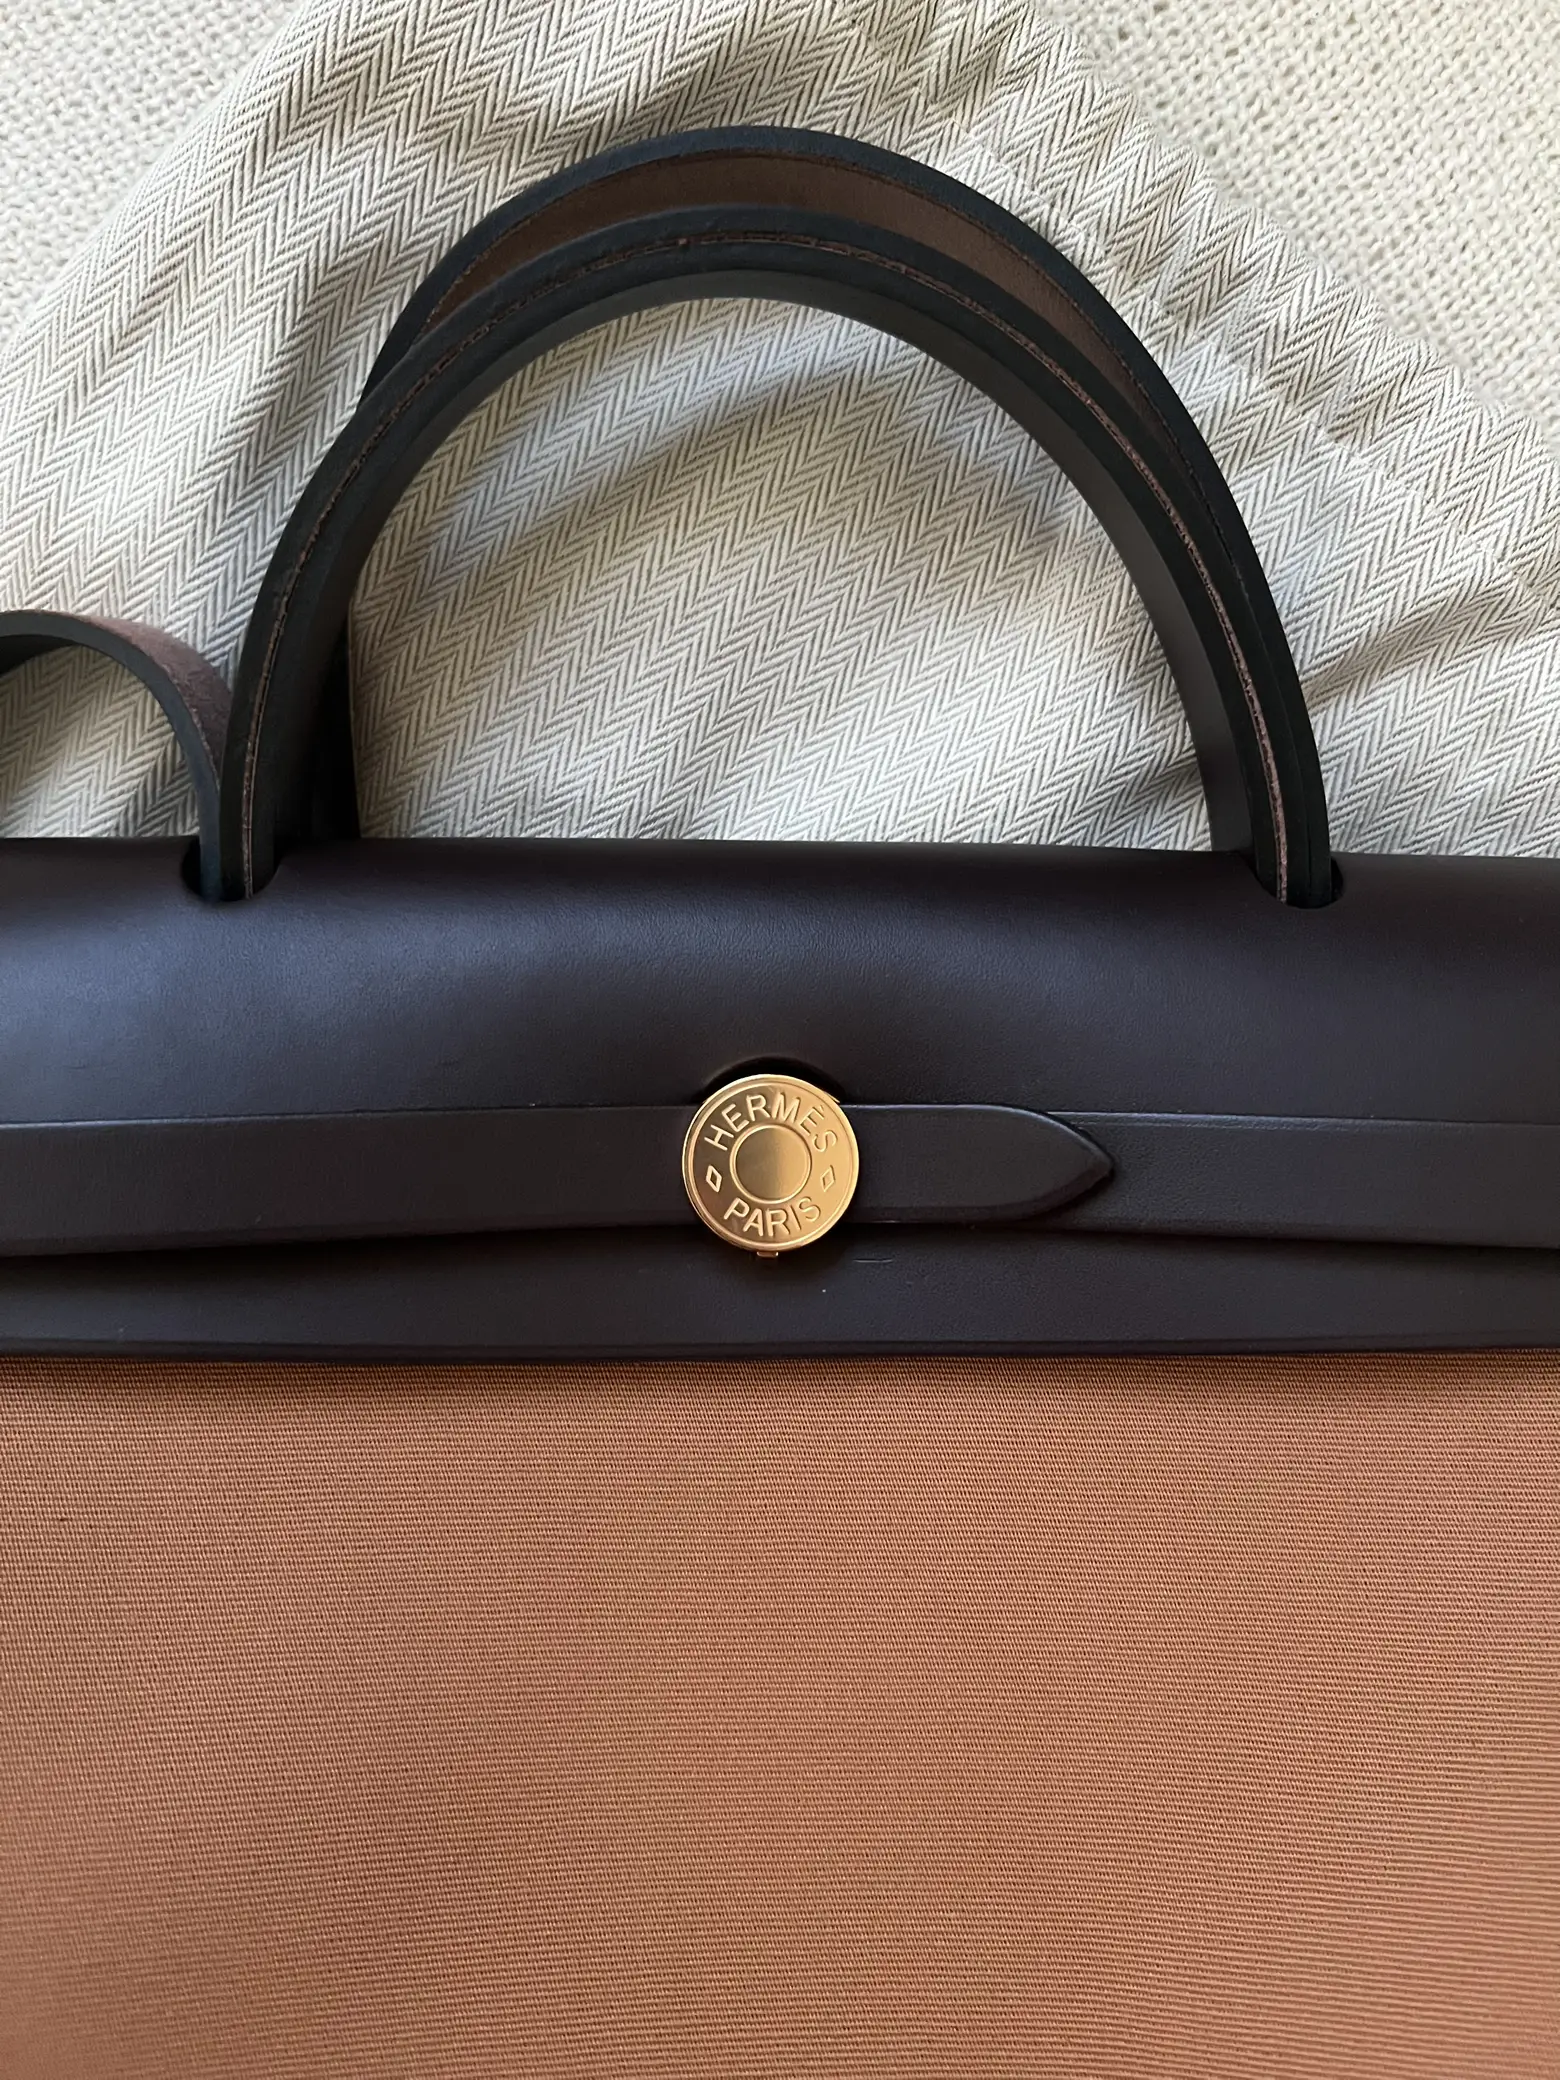 Herbag Zip 31 Unboxing and Review